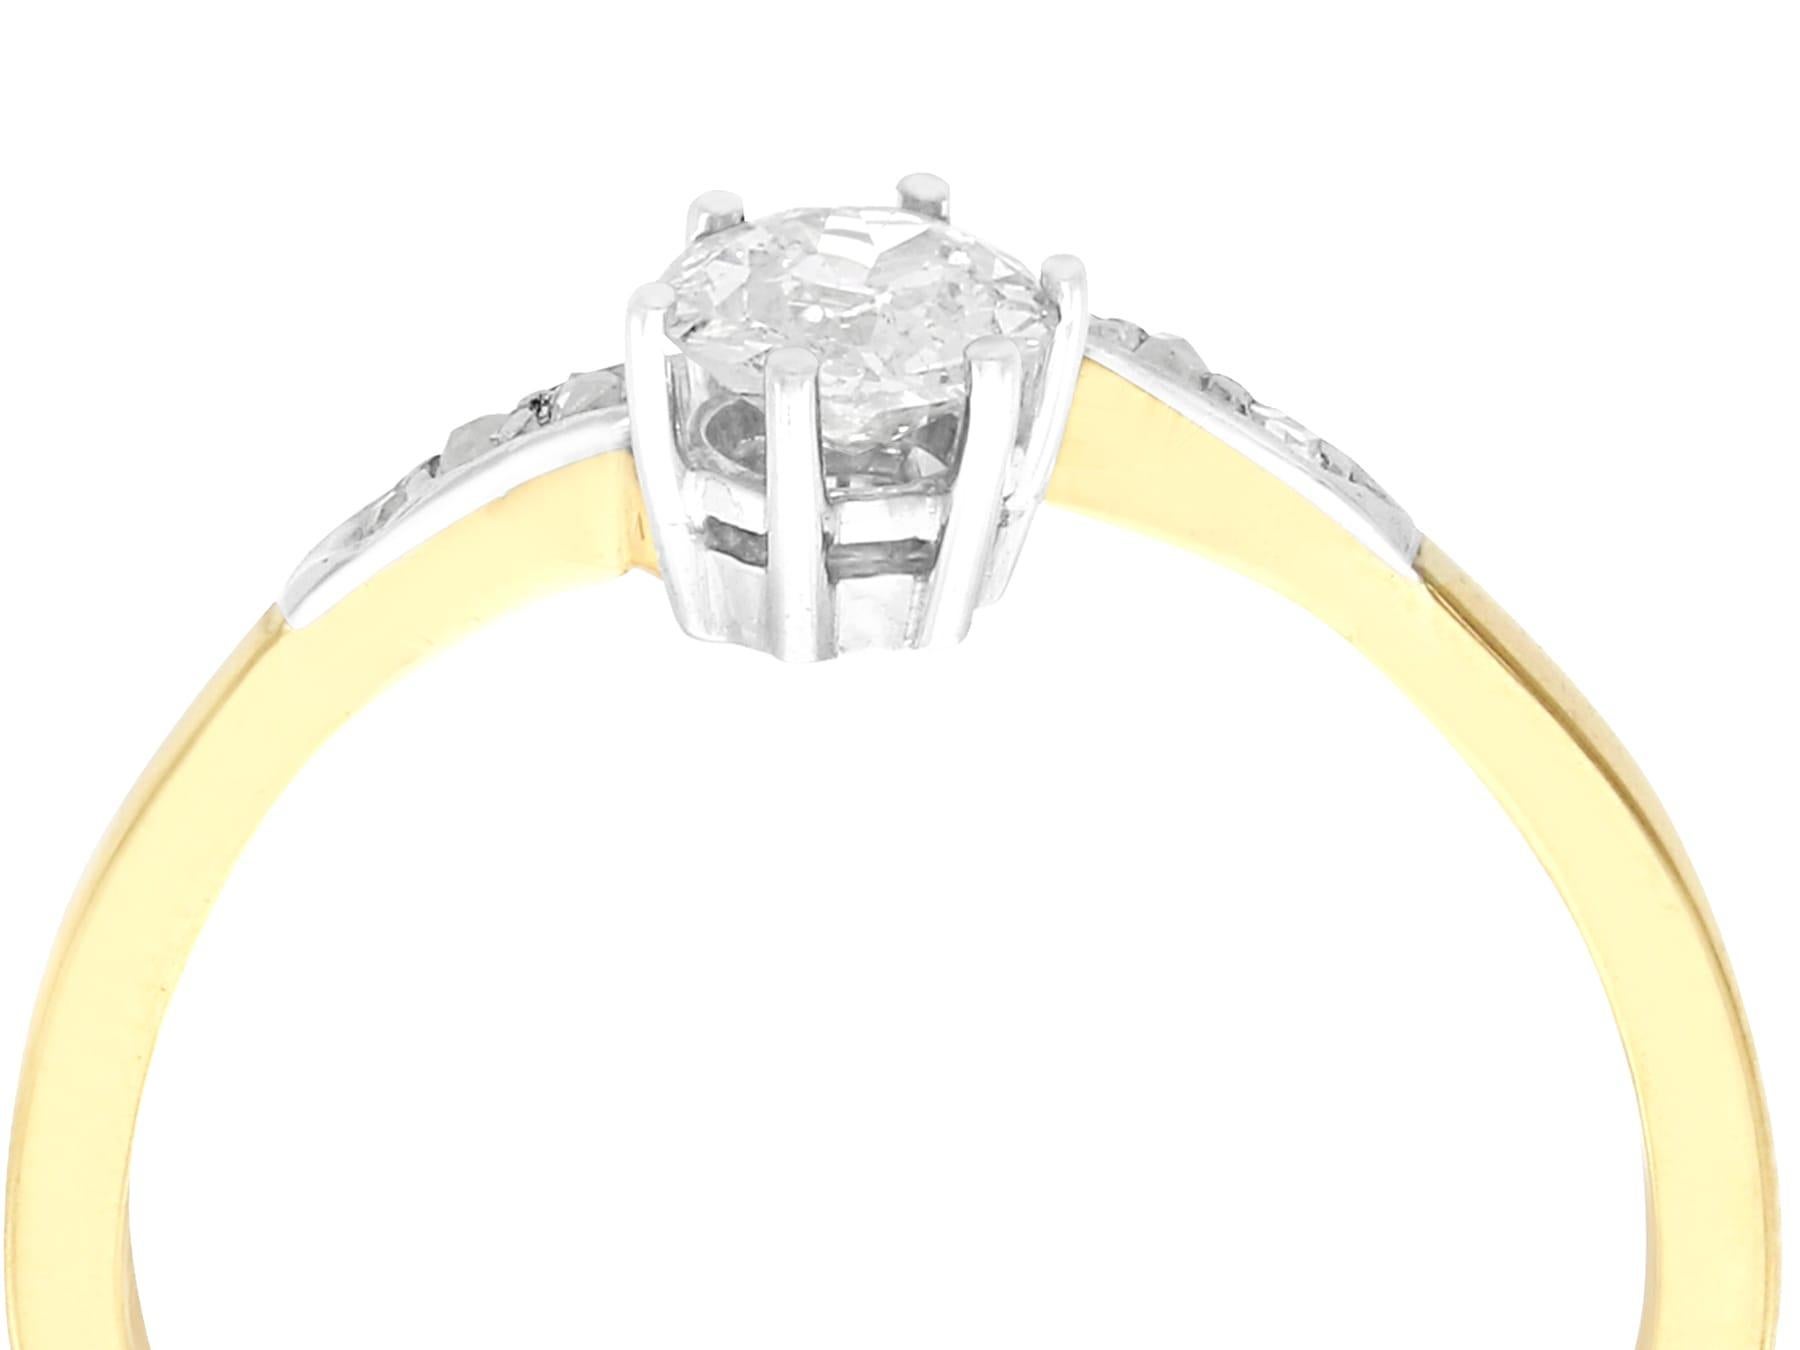 An impressive antique 0.50 carat diamond and 14 karat yellow gold, 14 karat white gold set twist ring; part of our diverse antique jewelry and estate jewelry collections.

This fine and impressive antique diamond ring has been crafted in 14k yellow